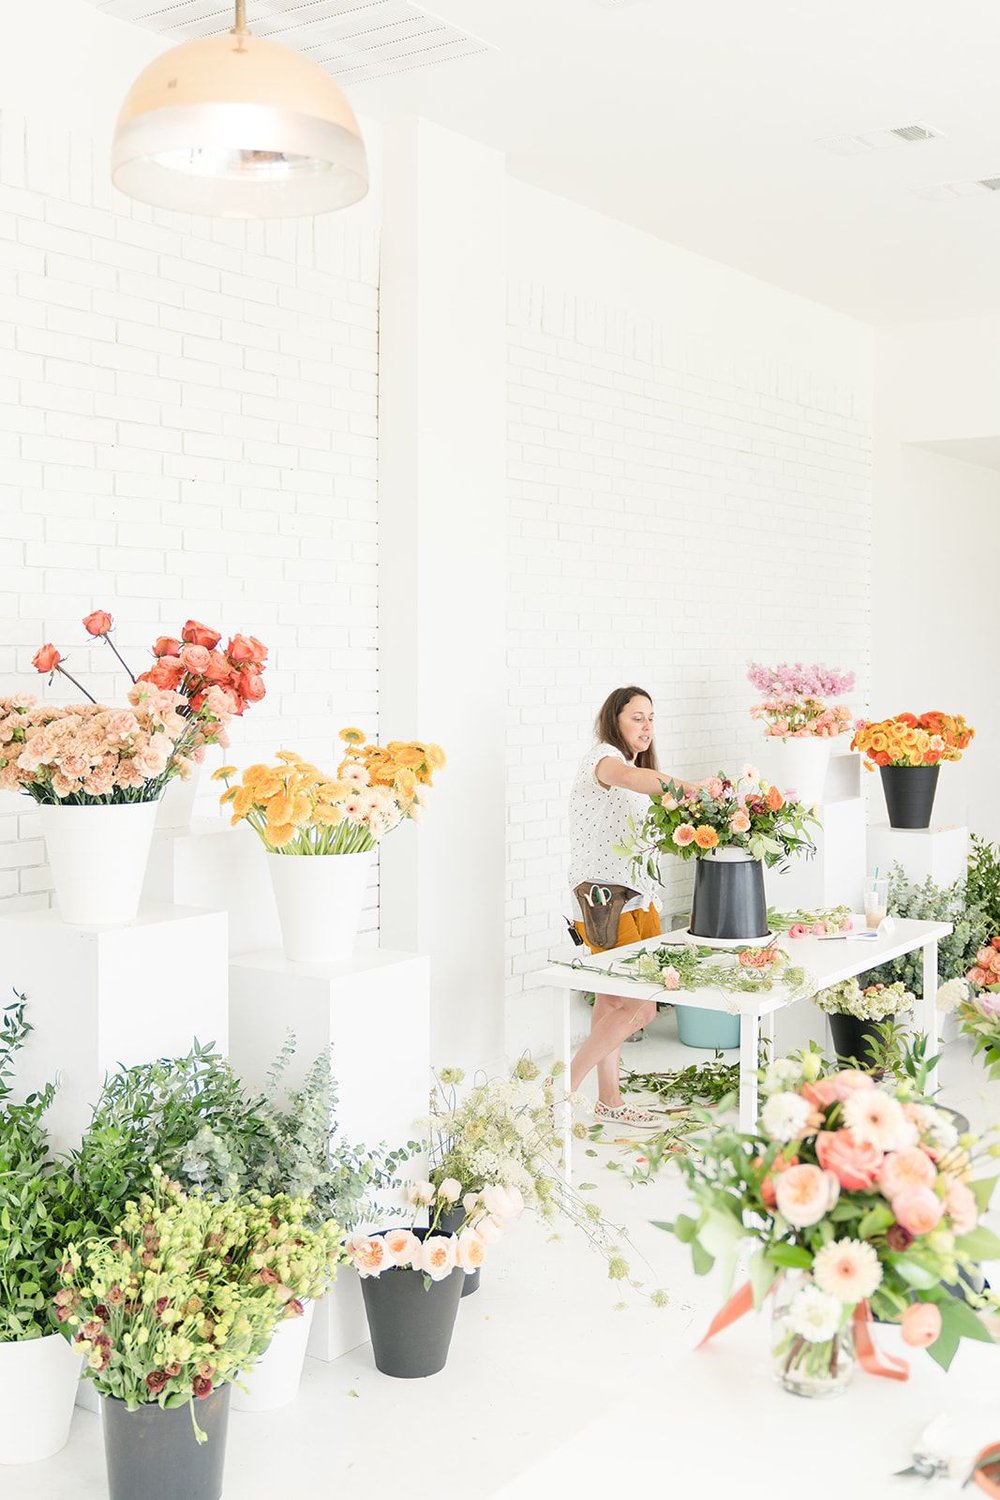 Floral Workshop at a Minimal Event Space in Dallas-Fort Worth.jpg